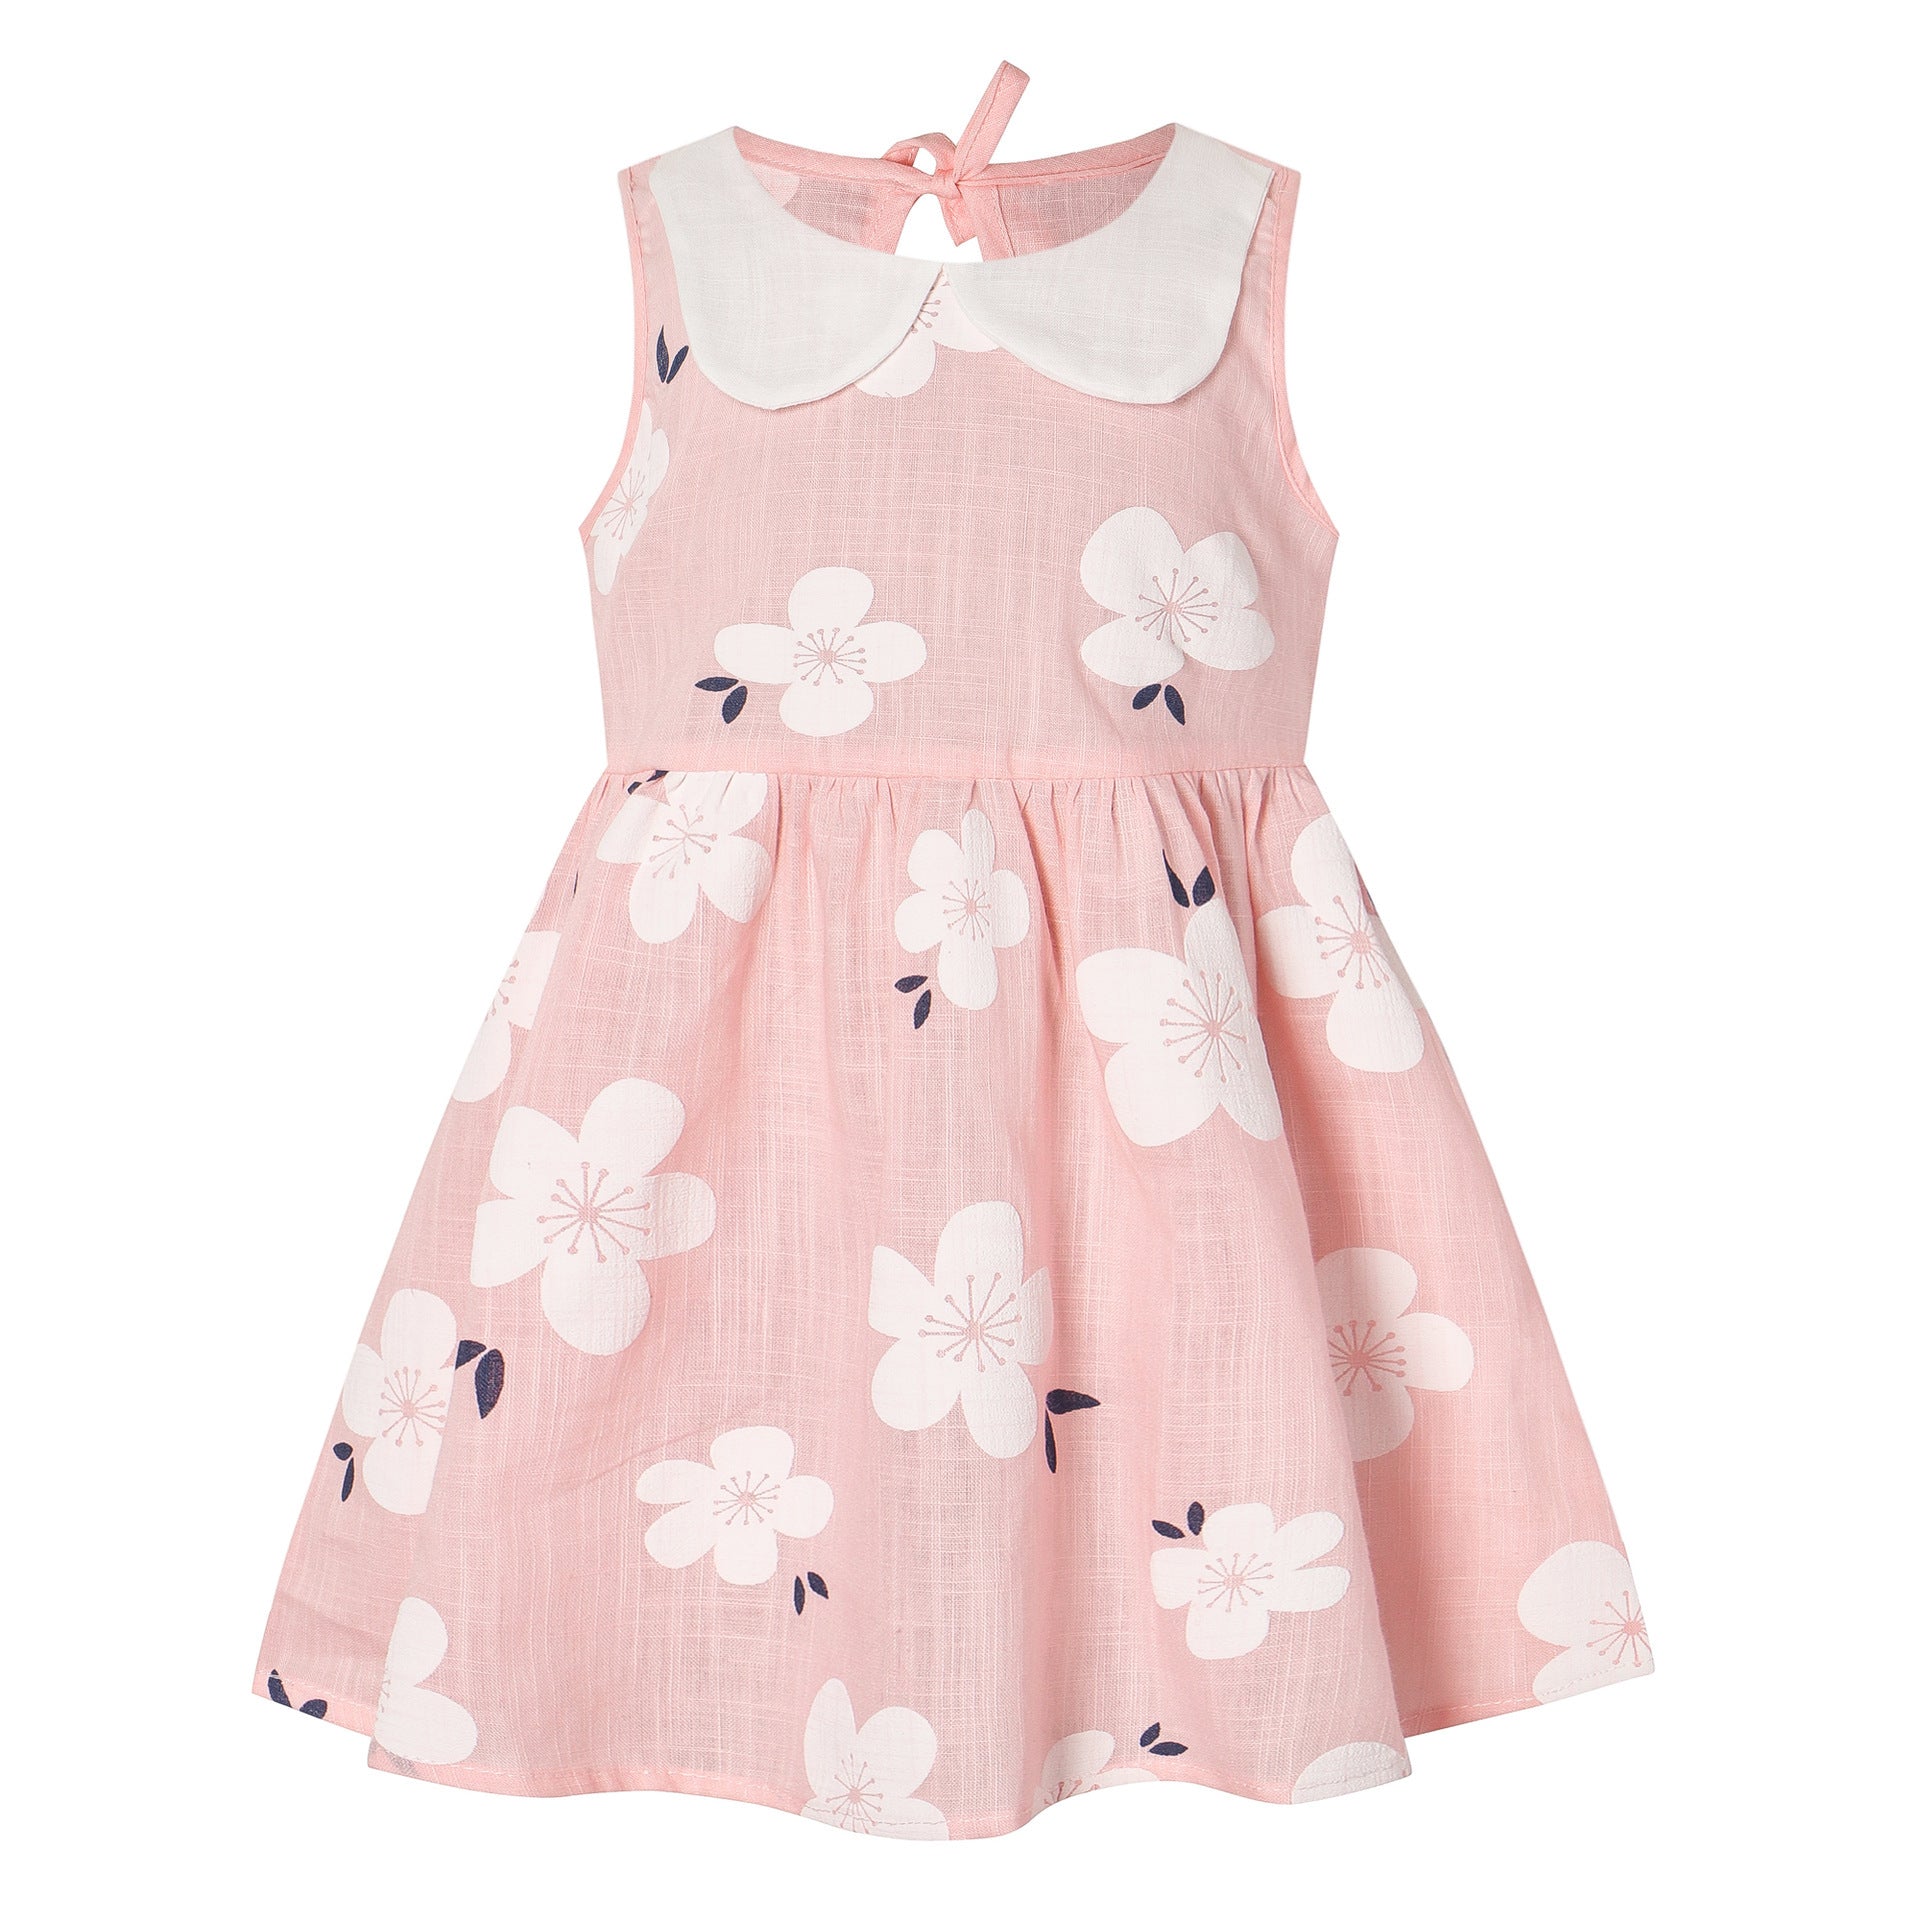 Toddler girl PINK floral dress from Eternal Gleams, sizes 1T to 9T. 